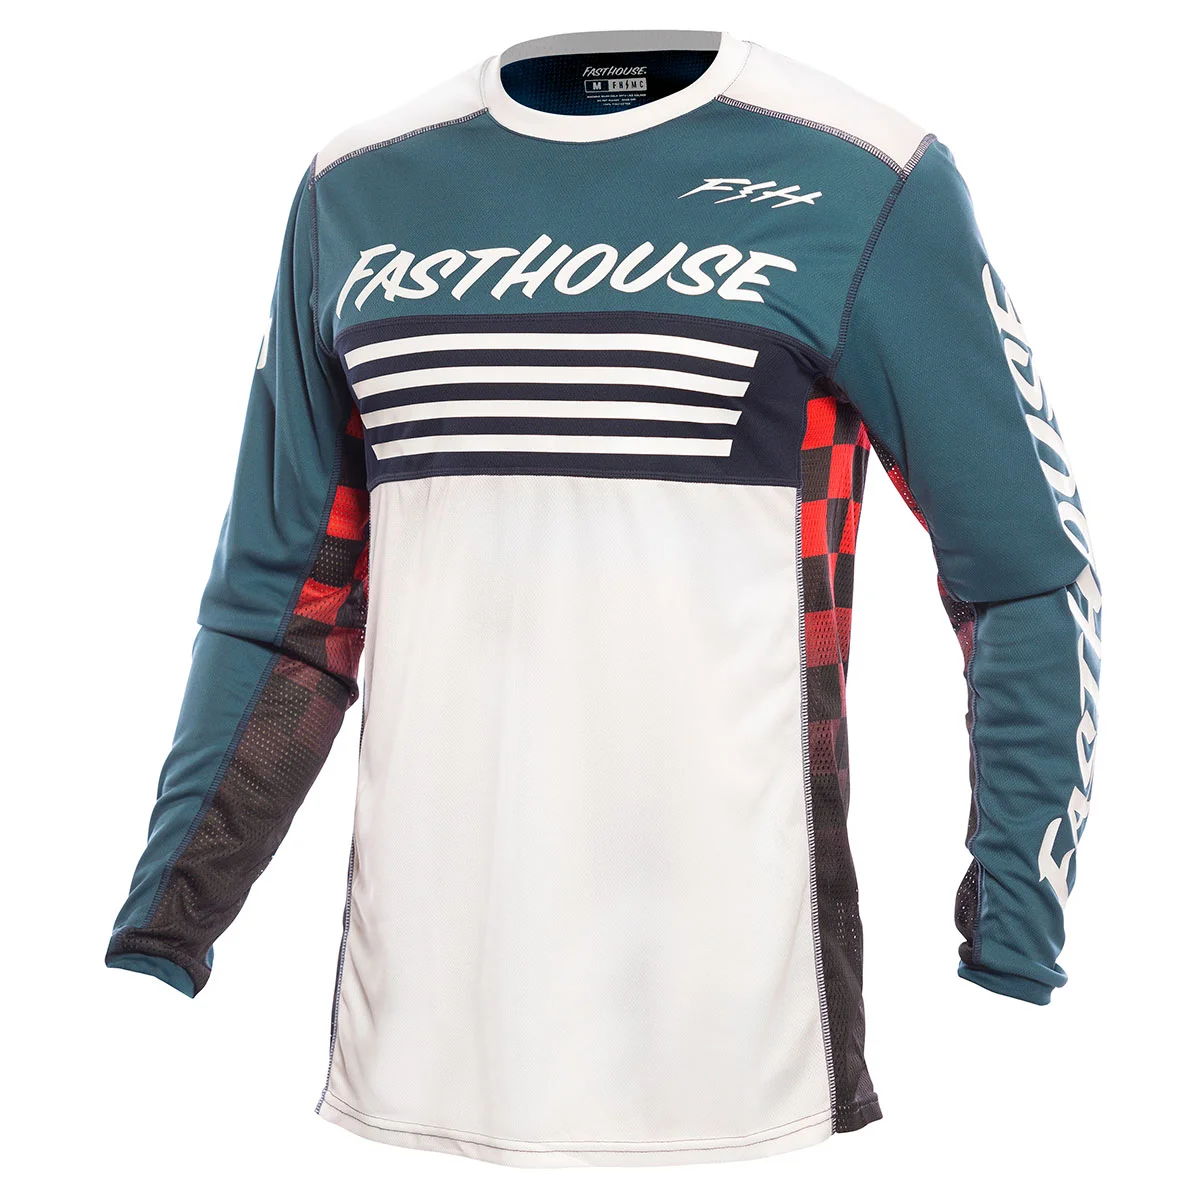 FASTHOUSE| Dirtbikeplus (ダートバイクプラス)